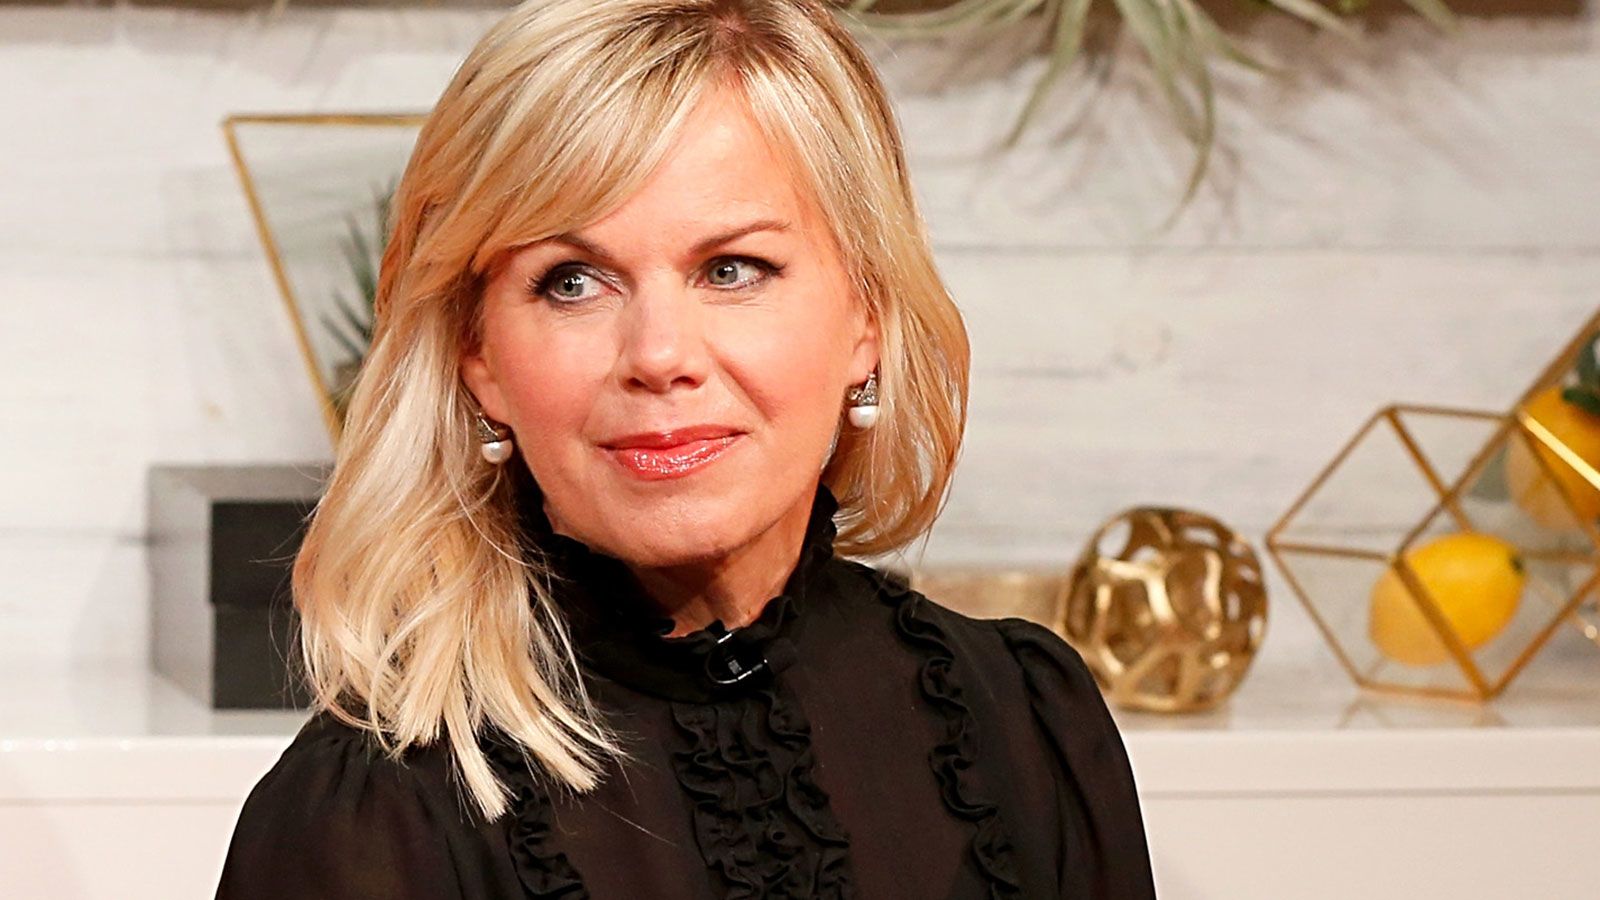 Gretchen Carlson Sexy Videos - Gretchen Carlson fights back against nondisclosure agreements like the one  she signed with Fox News | CNN Business